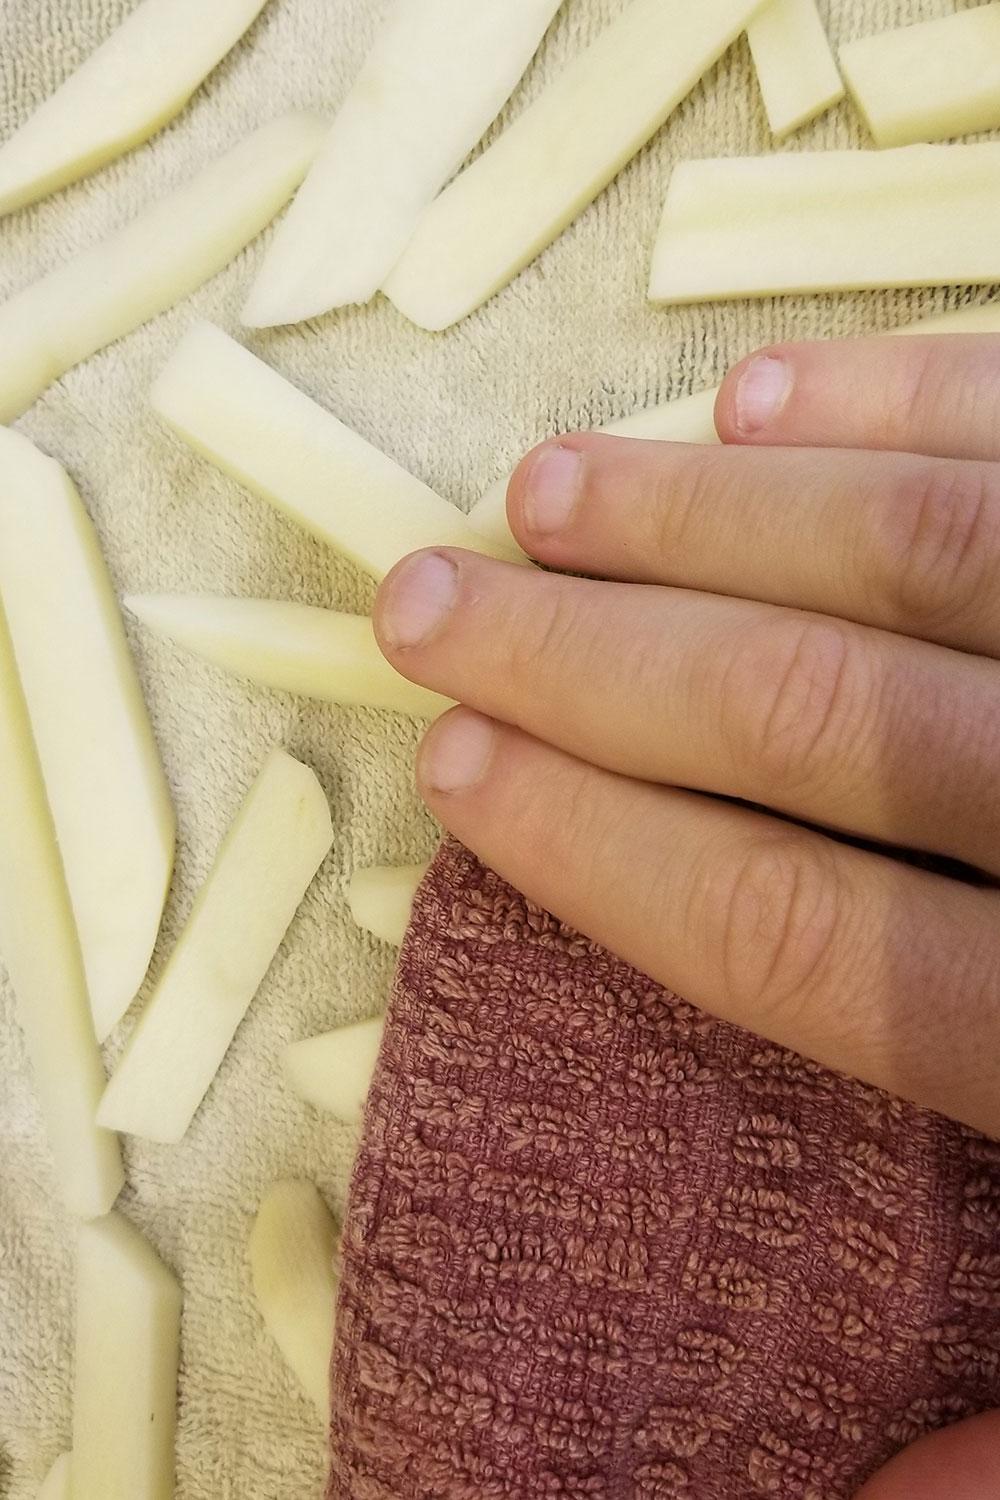 Pat potatoes dry with a clean dishcloth if making french fries. 